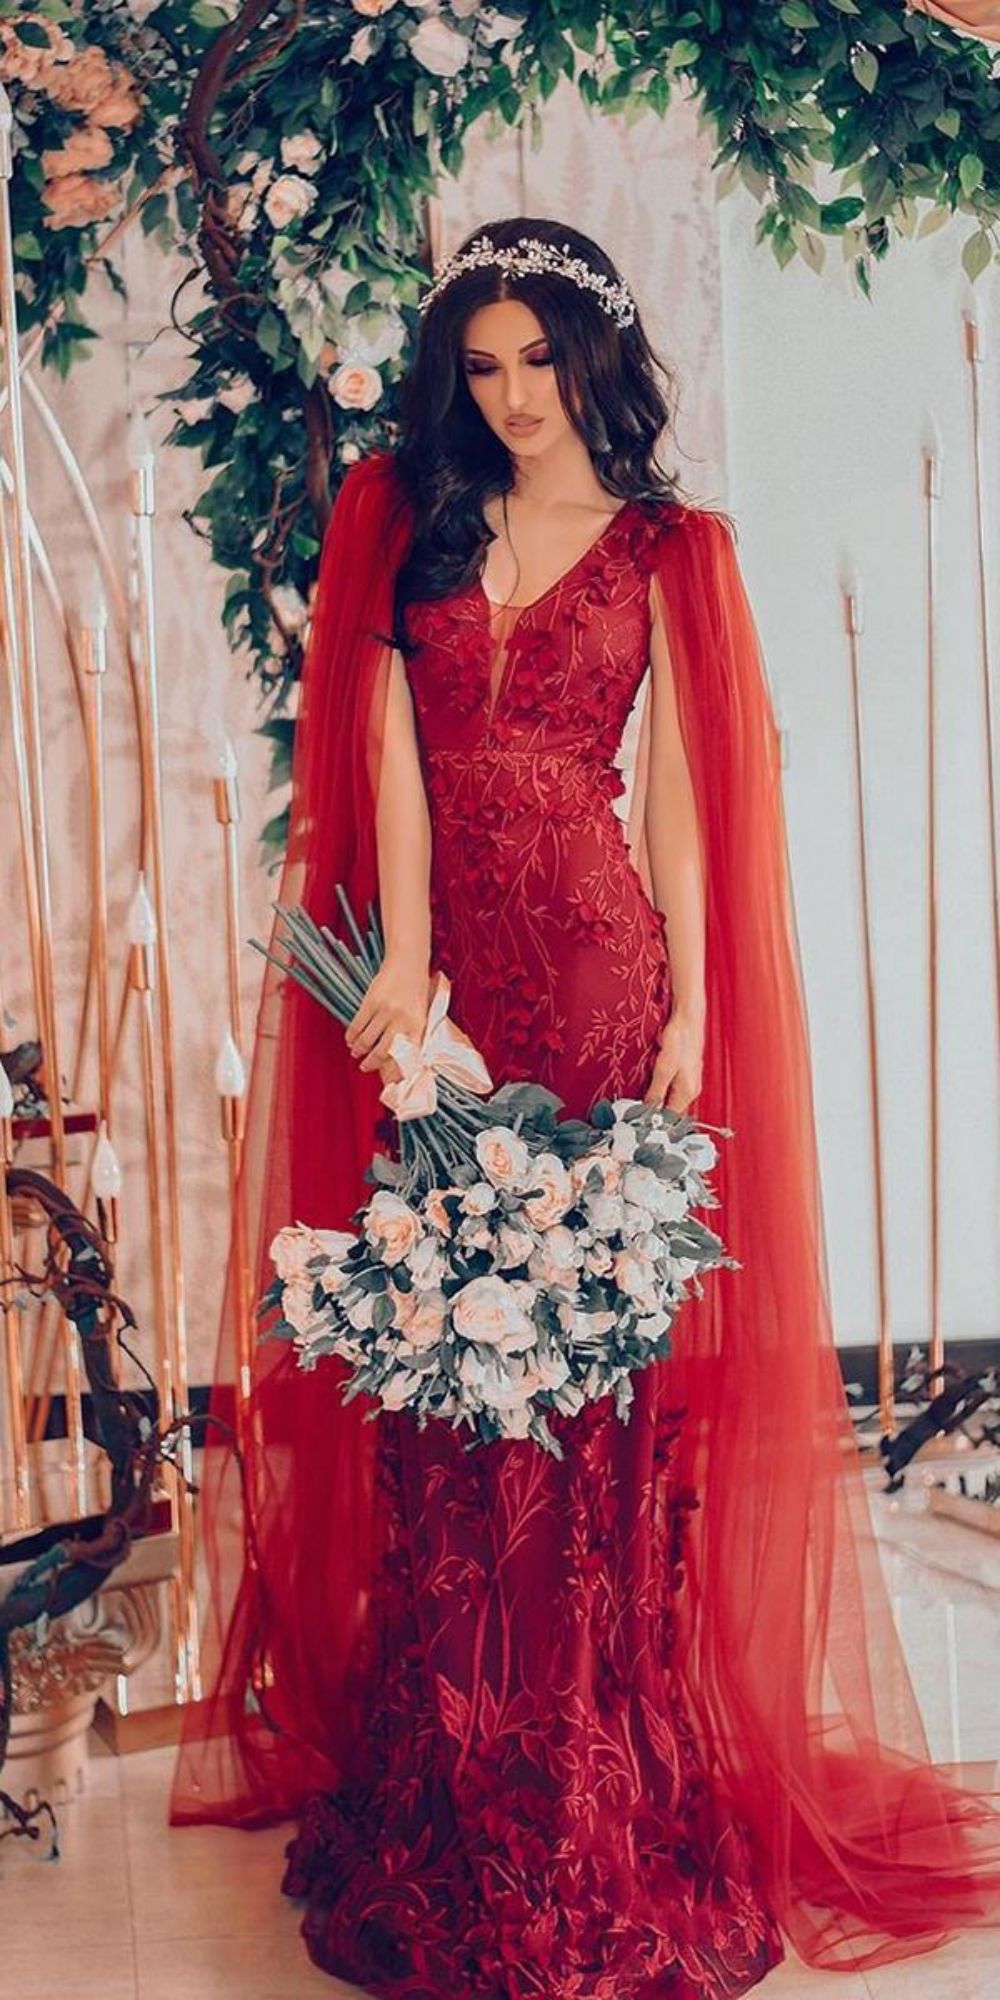 blood red wedding dresses sheath floral appliques with cape